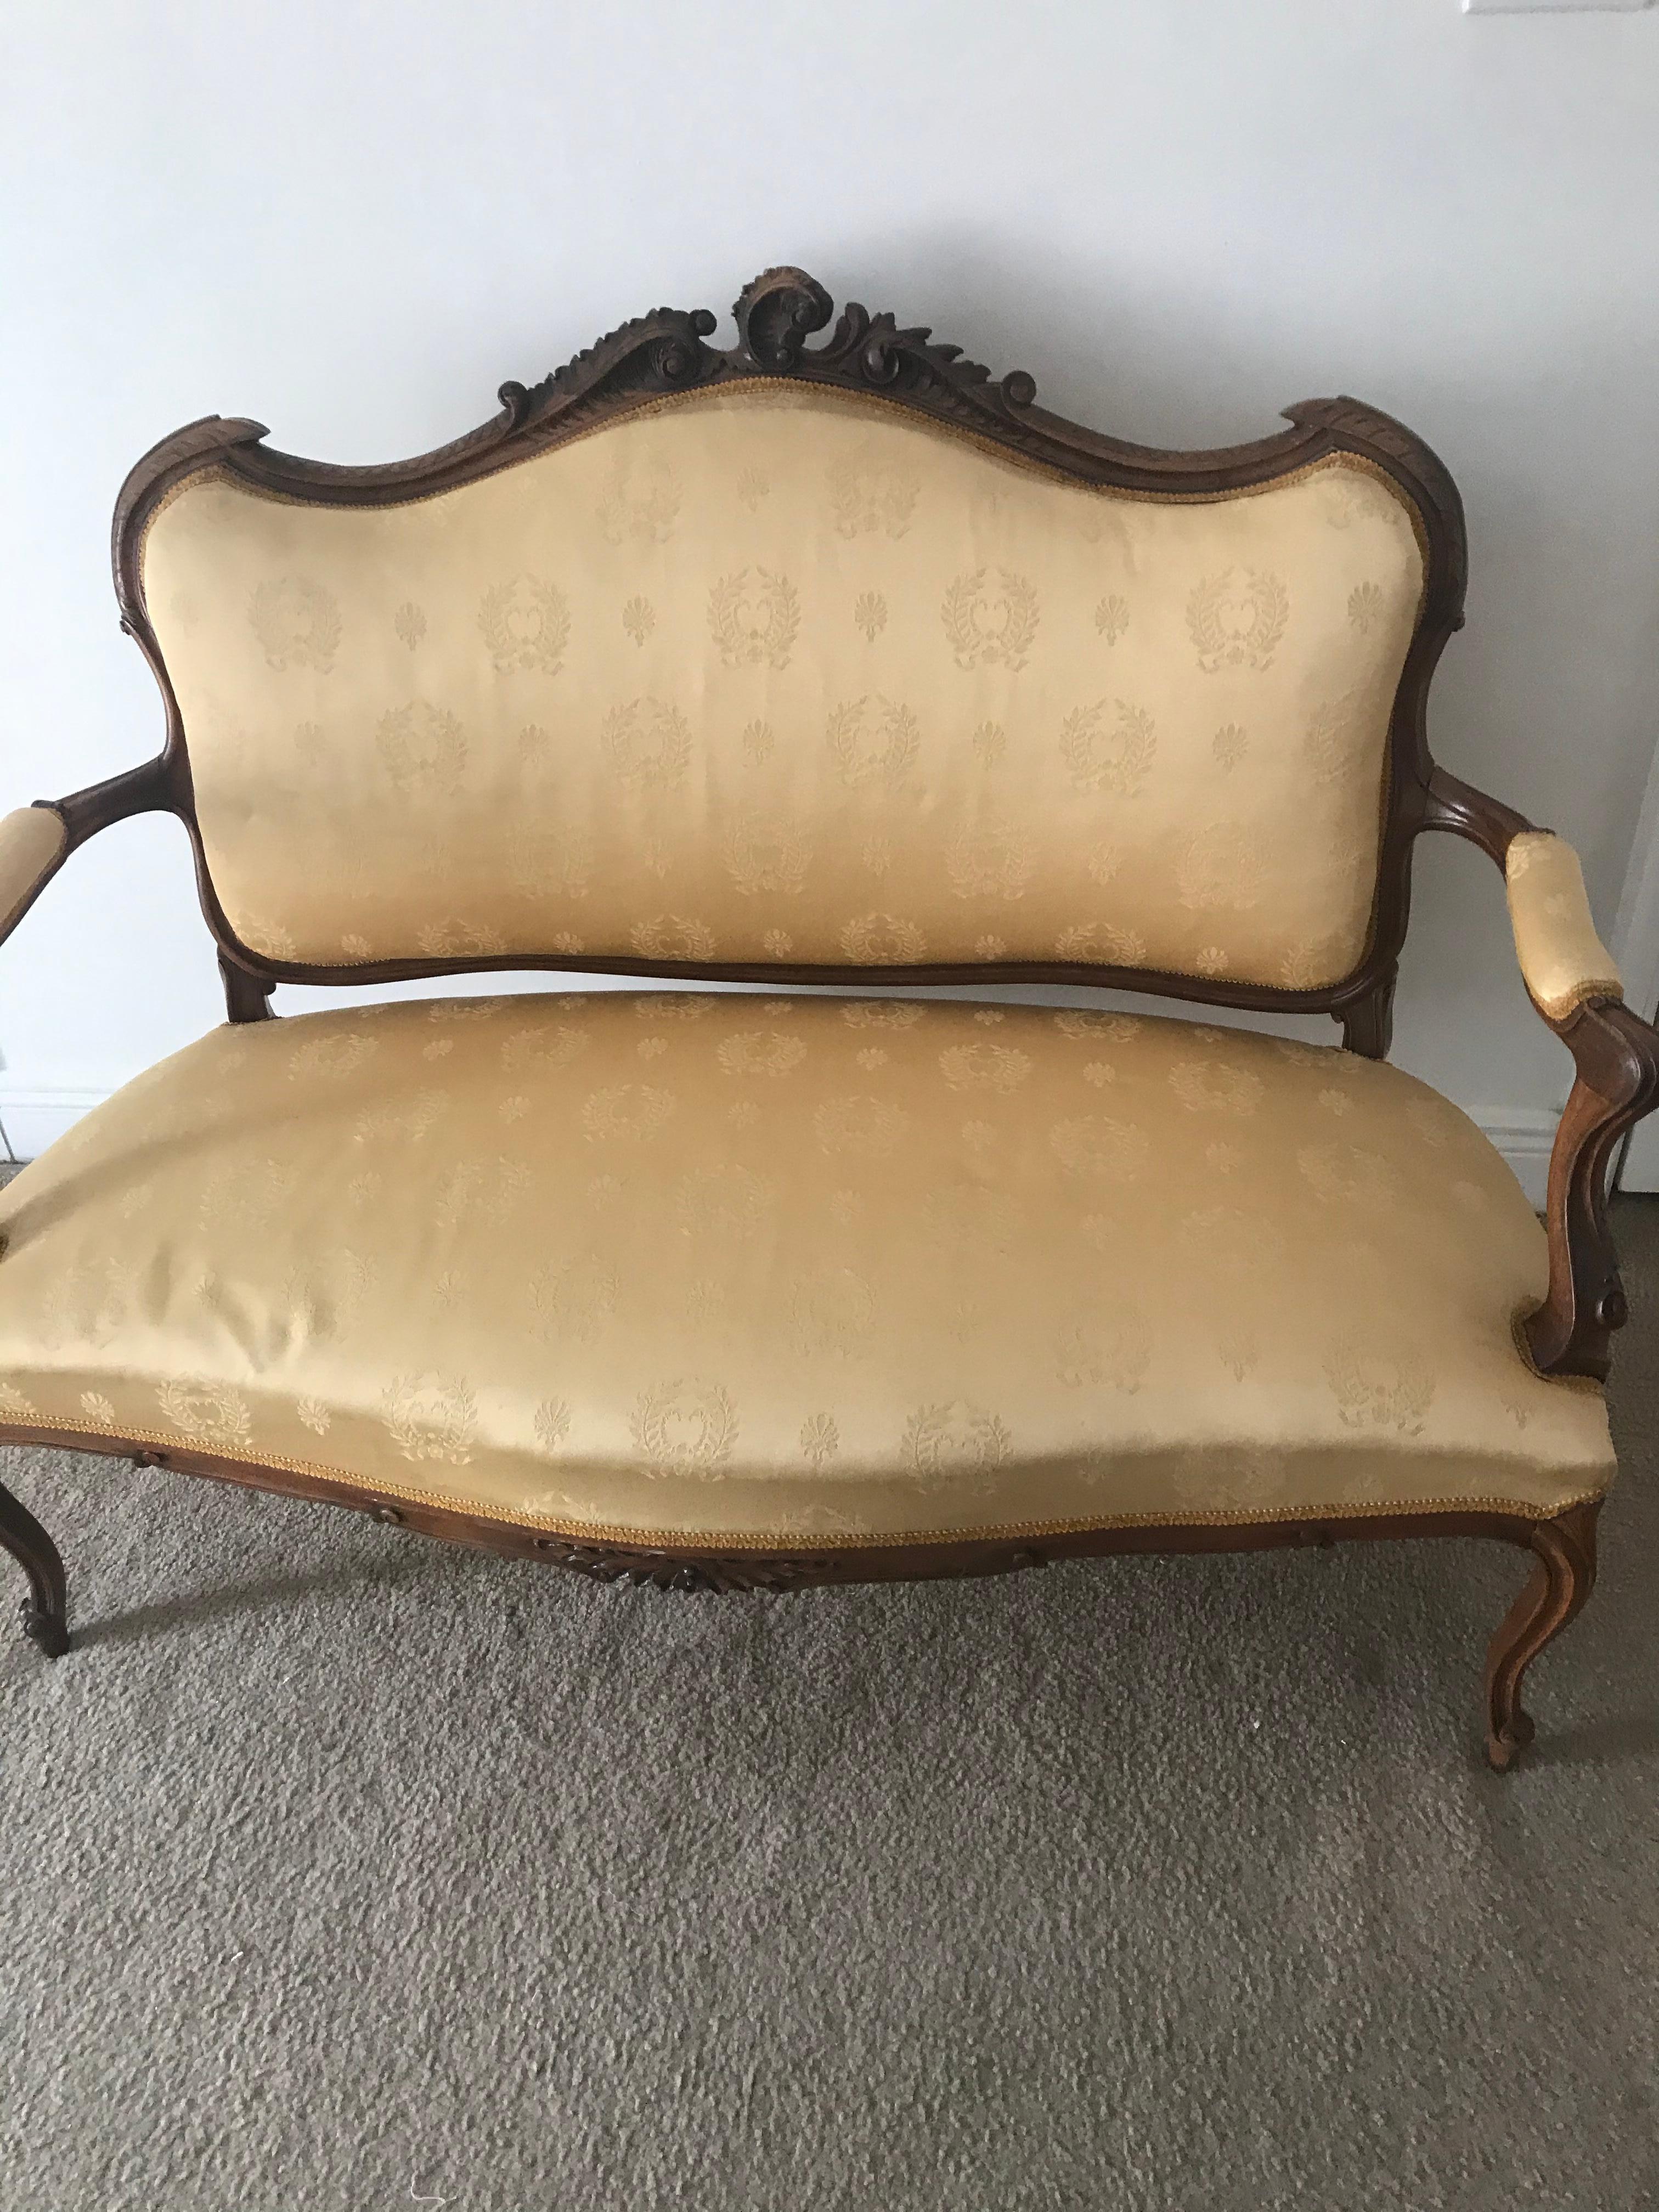 19th Century Antique French Louis XVI Sofa Settee Carved Walnut In Good Condition For Sale In Boca Raton, FL